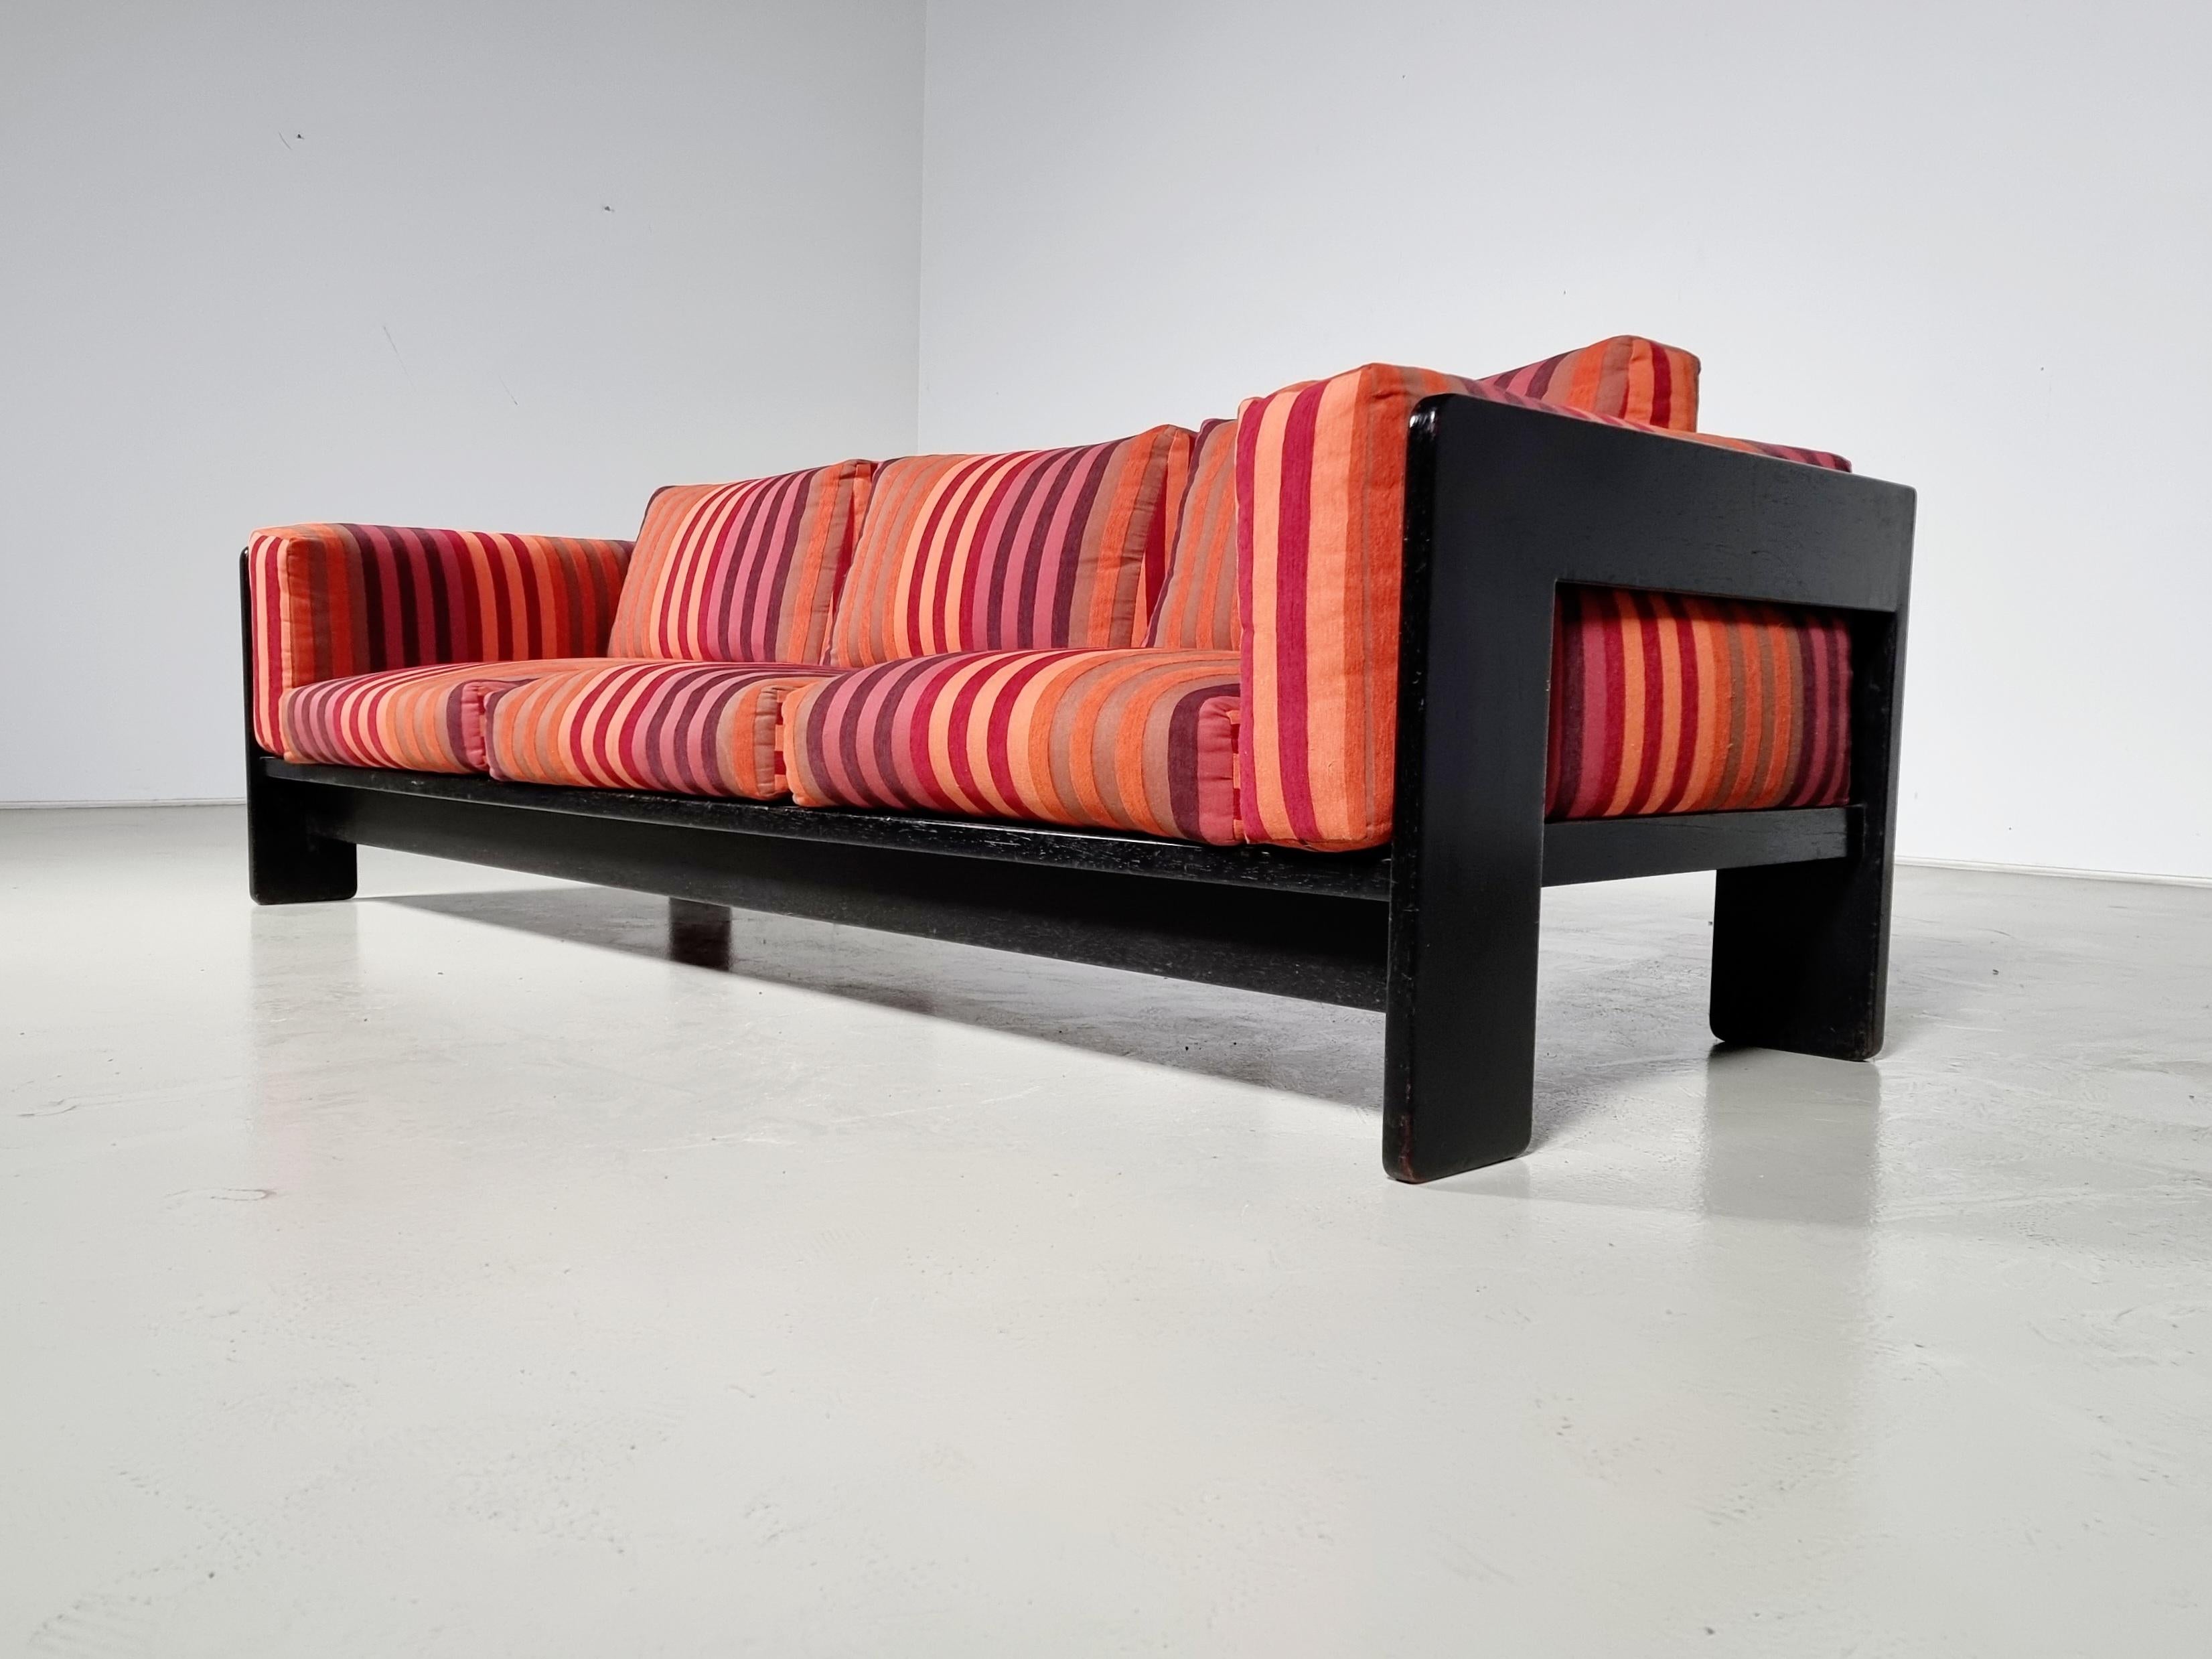 A three-seater sofa from the Bastiano series, designed by the Italian designer duo Afra & Tobia Scarpa for Knoll, Italy, circa 1960.

The frame is made of black painted oak wood, a loose upholstered seat- and back cushions. The cushions still have